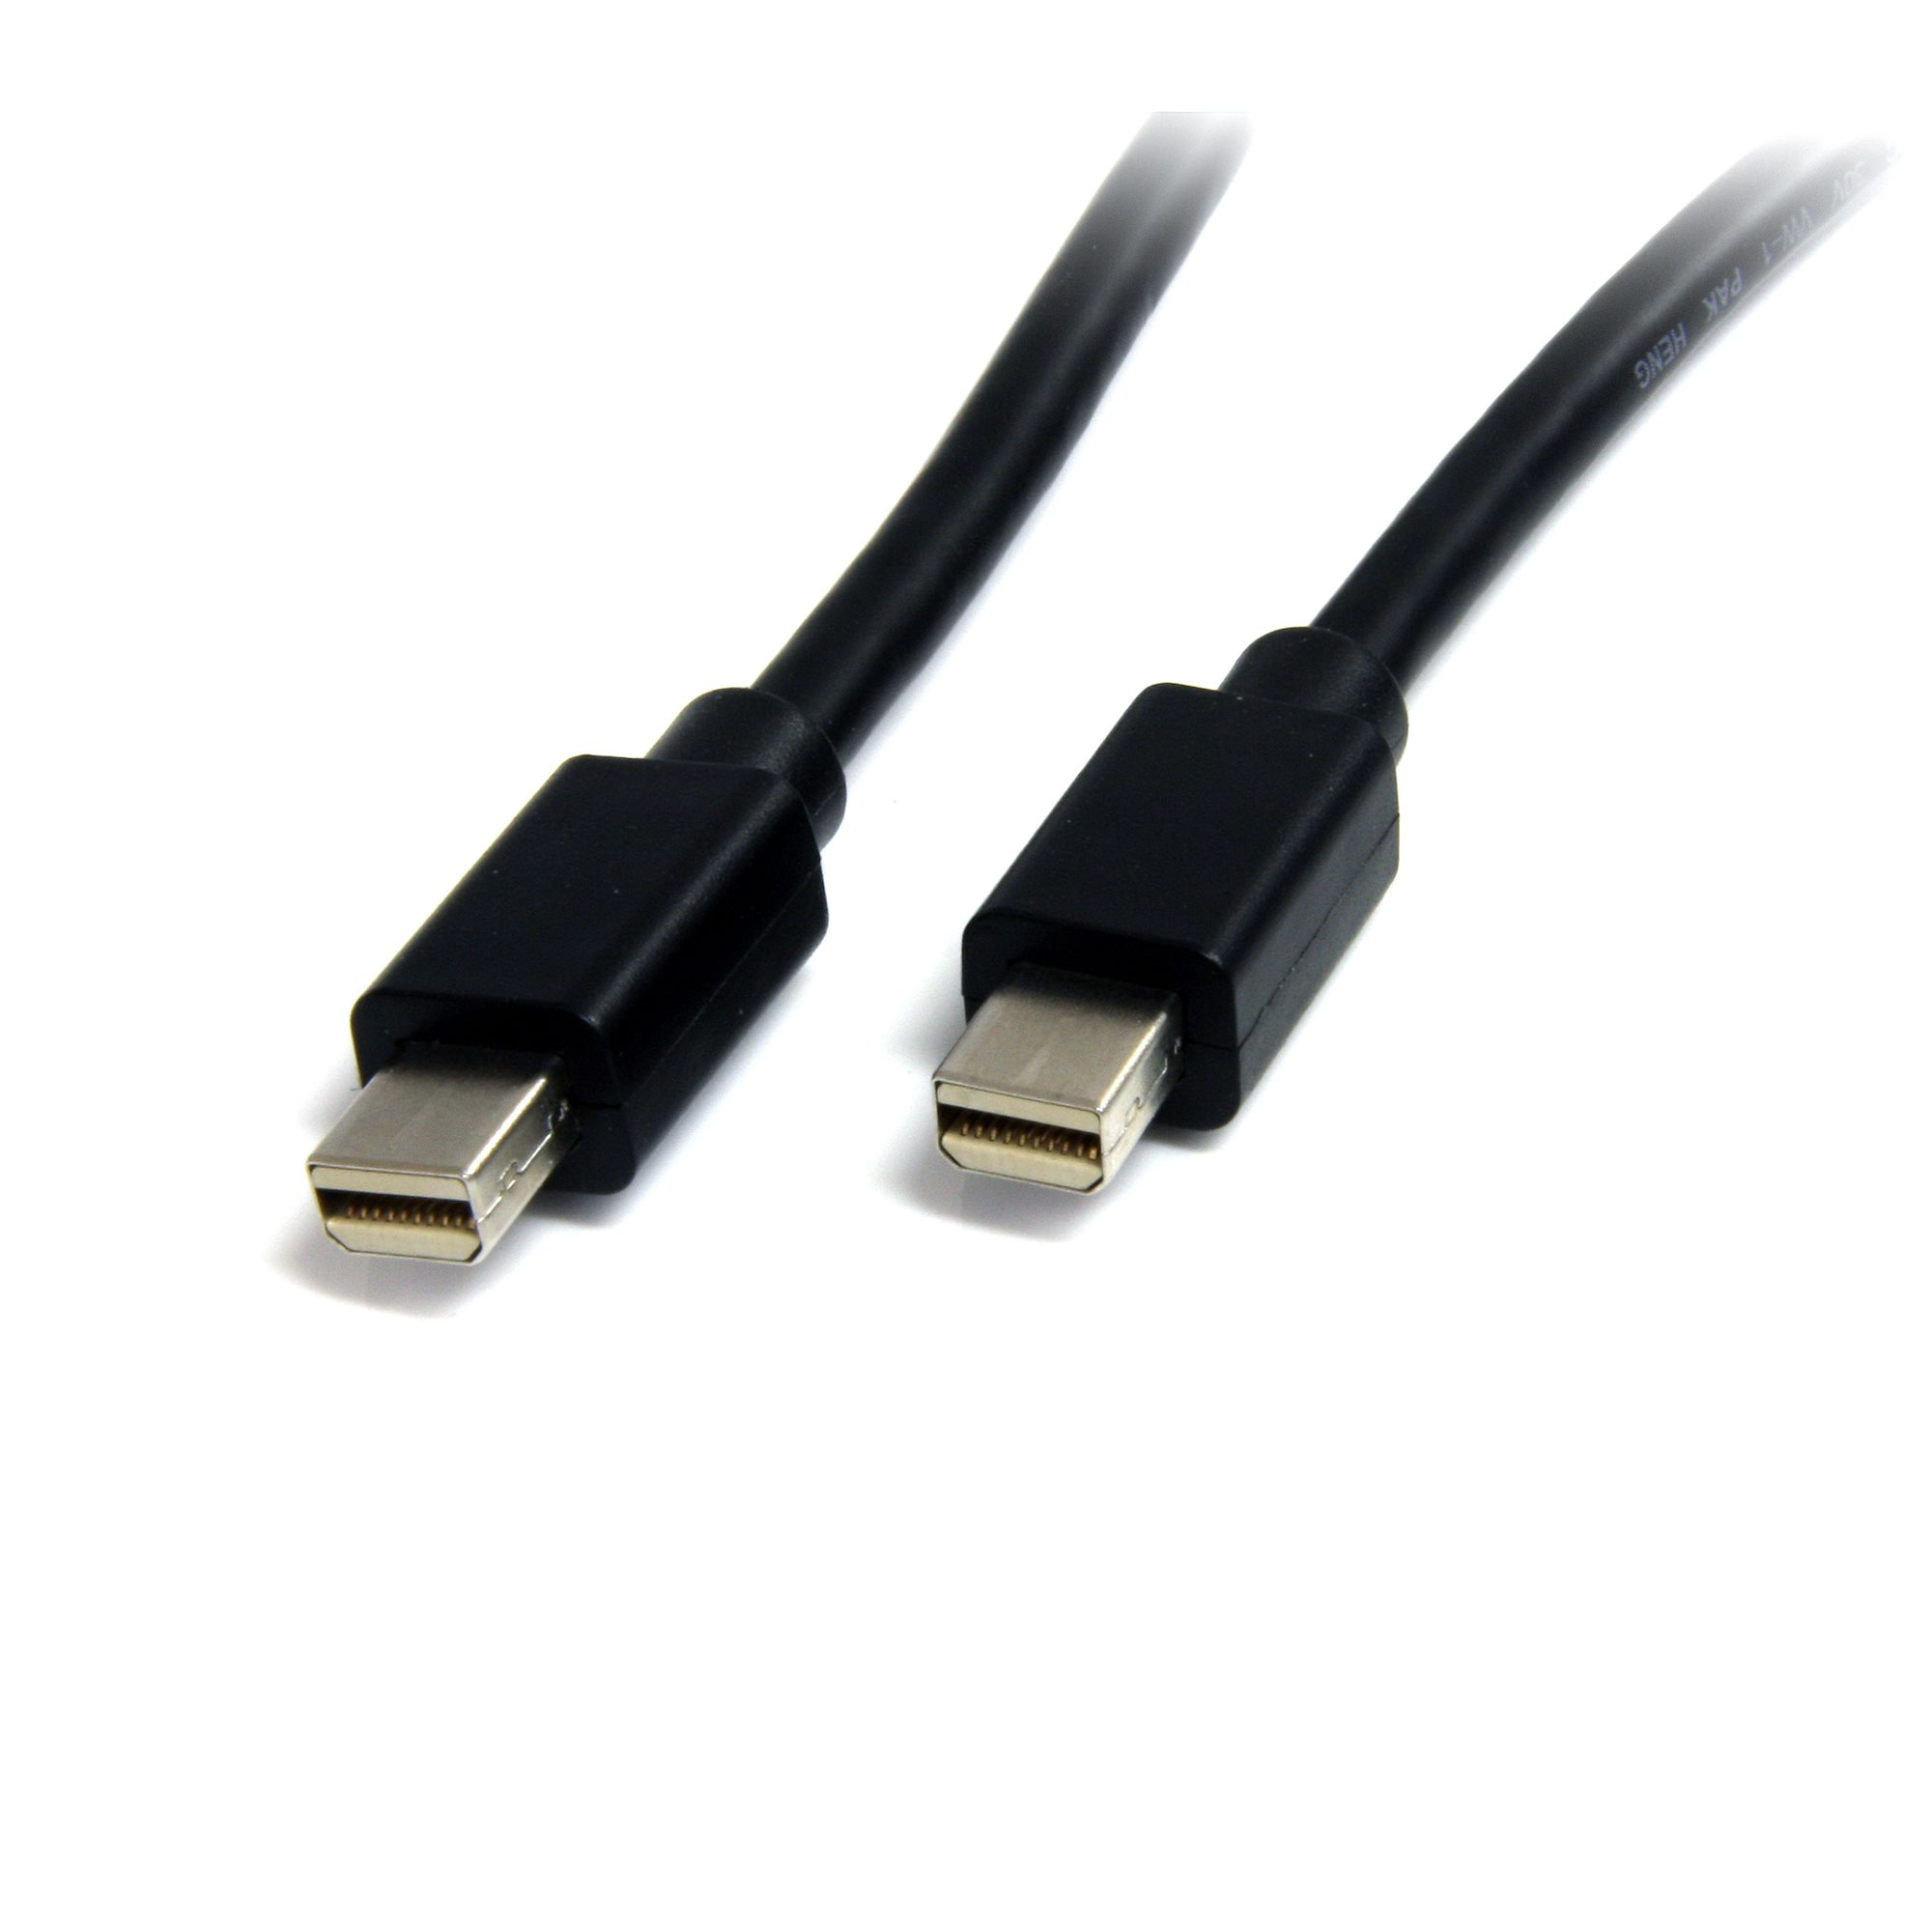 StarTech.com 2m (6ft) Mini DisplayPort Cable - 4K x 2K Ultra HD Video - Mini DisplayPort 1.2 Cable - Mini DP to Mini DP Cable for Monitor - mDP Cord works with Thunderbolt 2 Ports - M/M